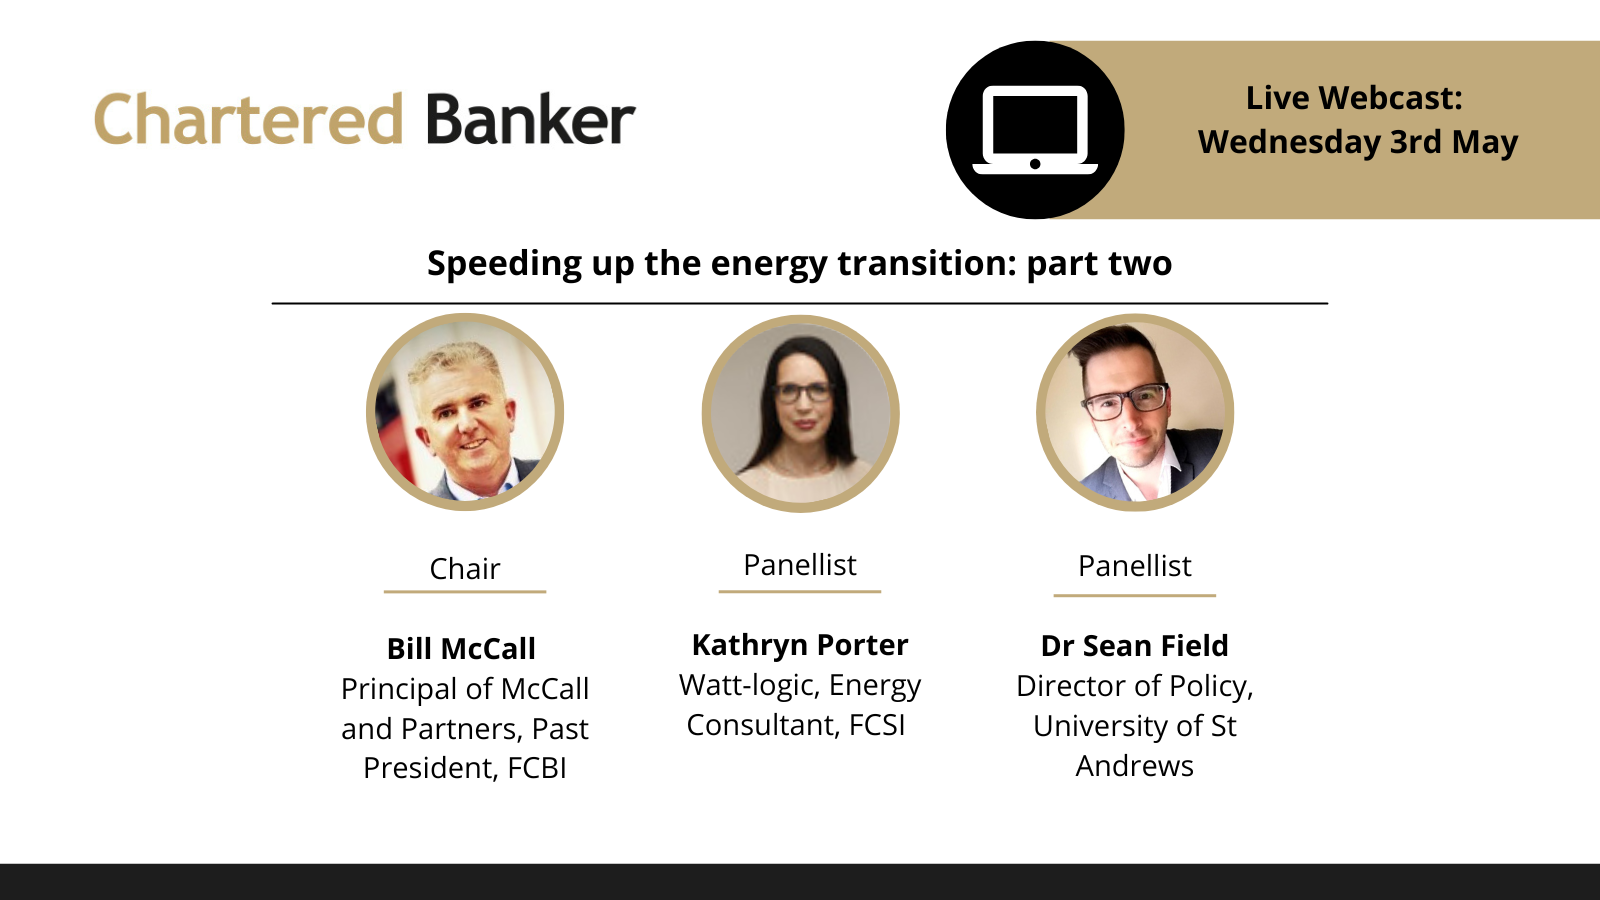 Speeding up the energy transition part two